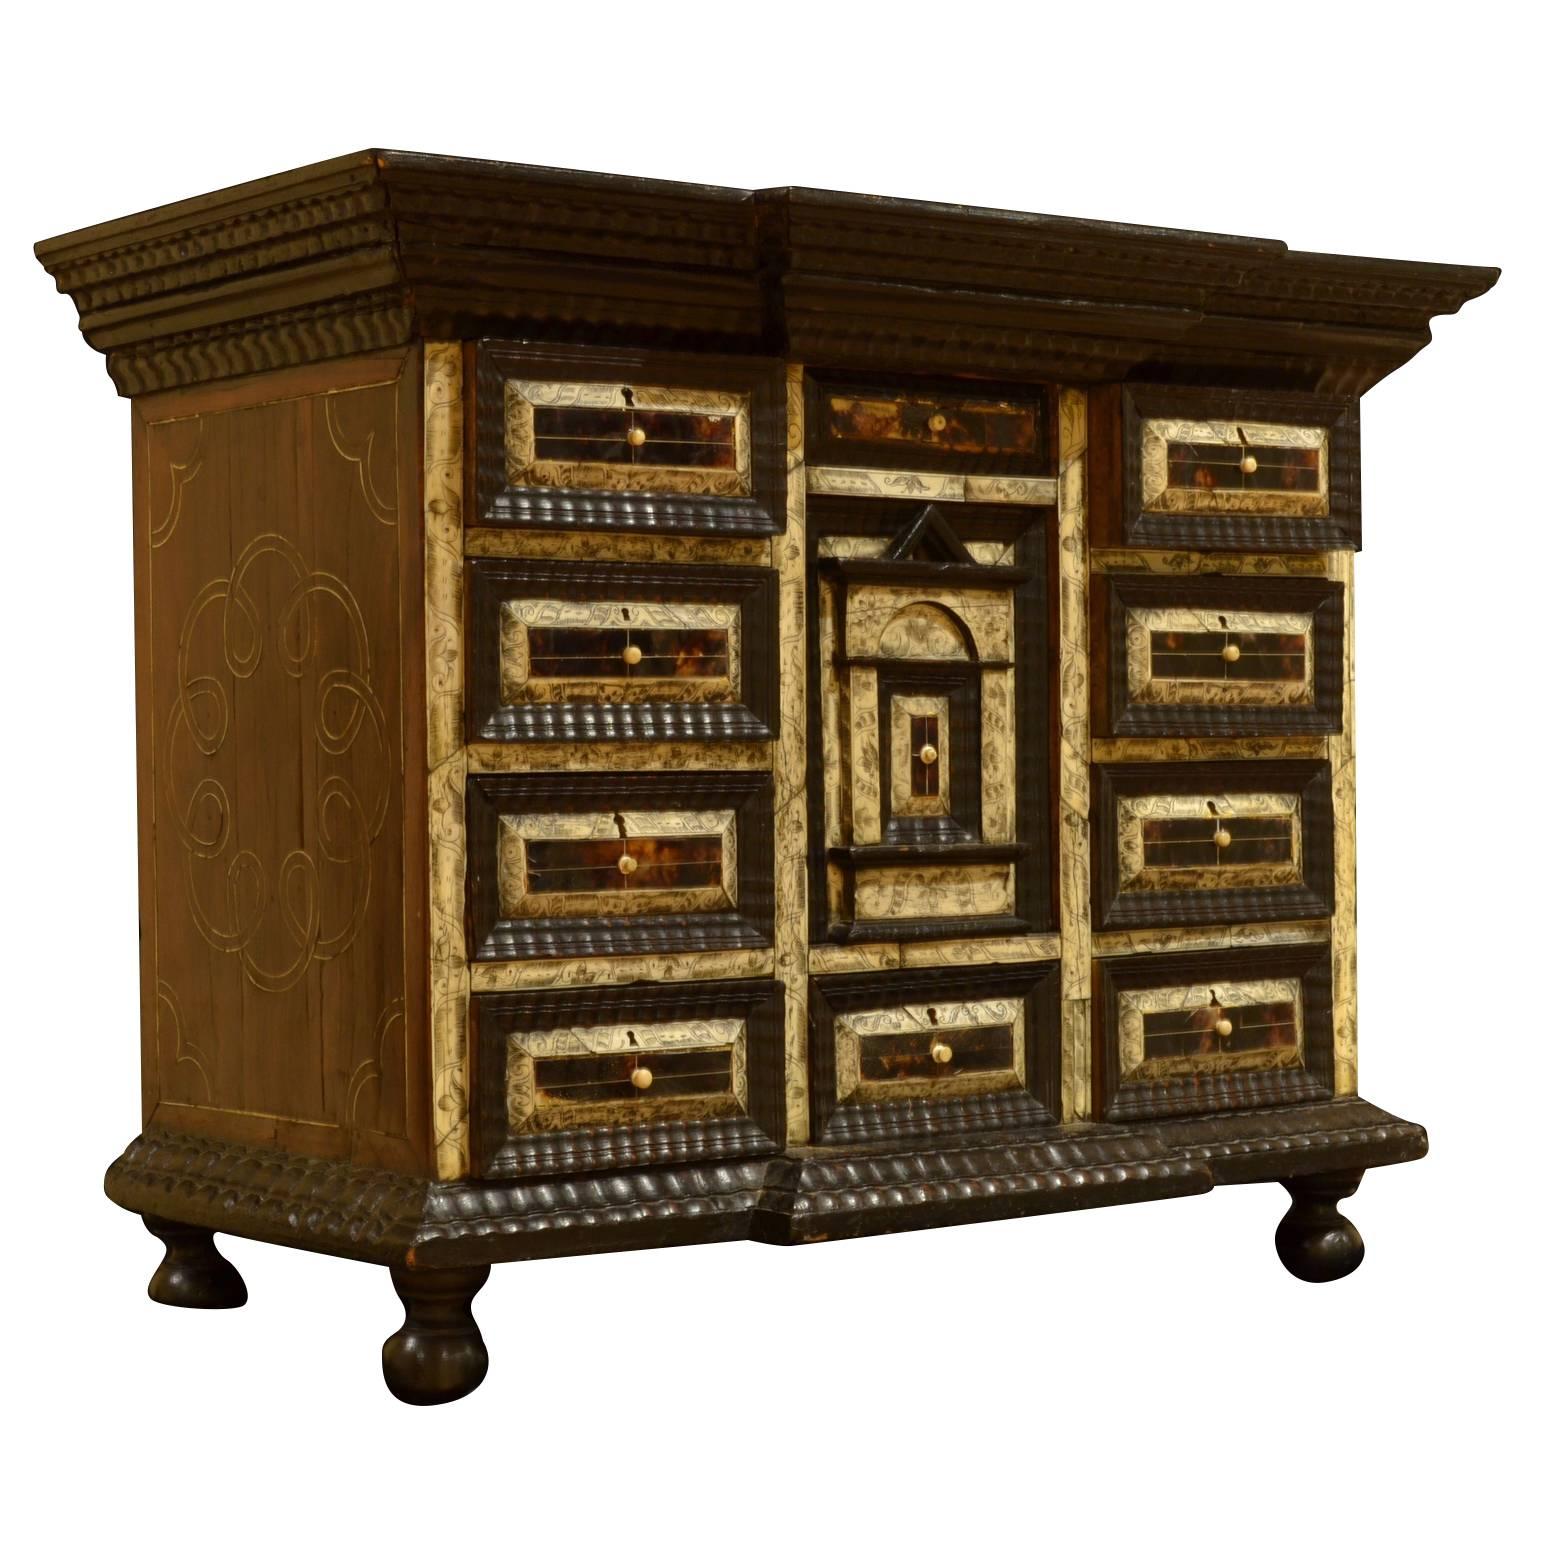 Mexican Tortoiseshell and Pen-Engraved Cabinet For Sale